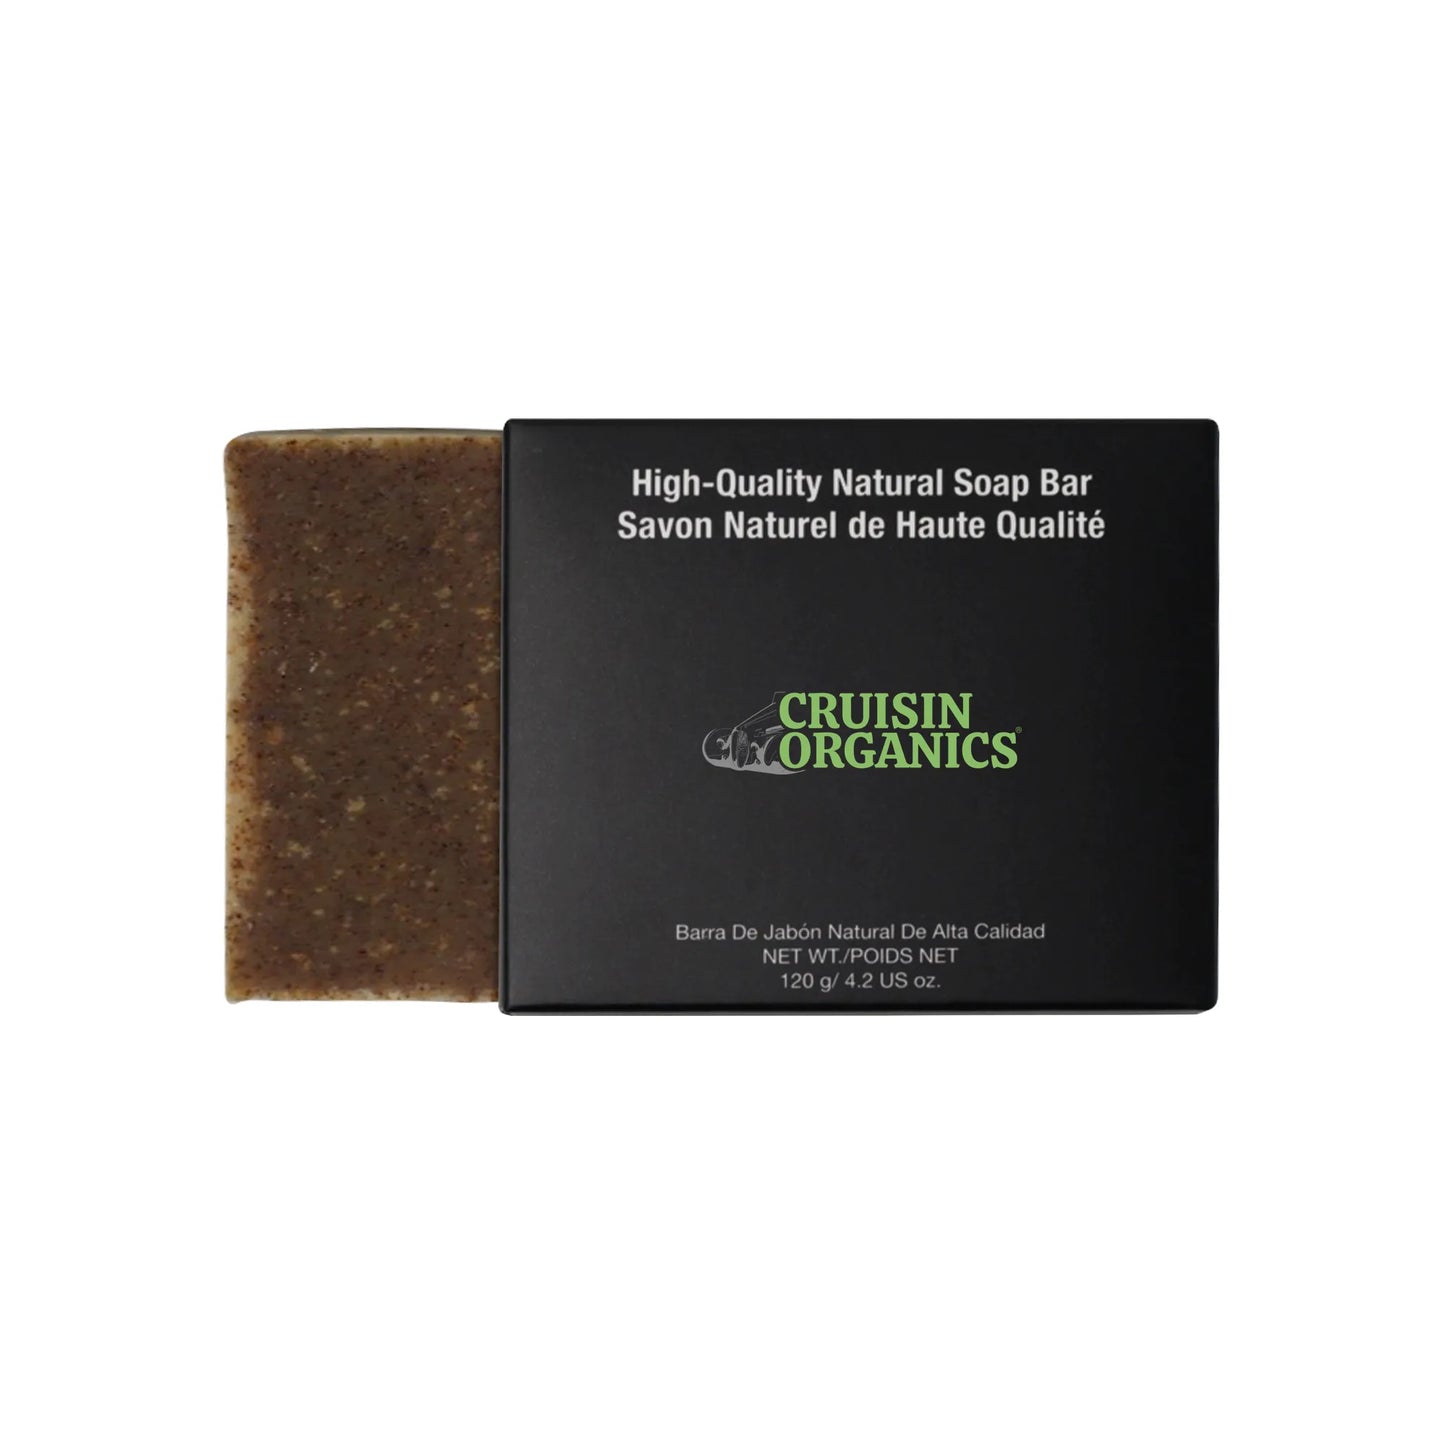 Cruisin Organics Apricot Exfoliating soap. Make way for the gentlest exfoliator from the superstar ingredient, apricots. Utilizing the simple, natural ingredient of apricot seeds, this soap gently exfoliates and brightens the skin. A sweet almond oil infusion removes dark spots and dark circles for a refreshing cleanse. Lemongrass oil controls acne and blemishes, making it perfect for revitalizing your skin. Packed with goat’s milk, this comfortable formula will leave behind smooth skin.